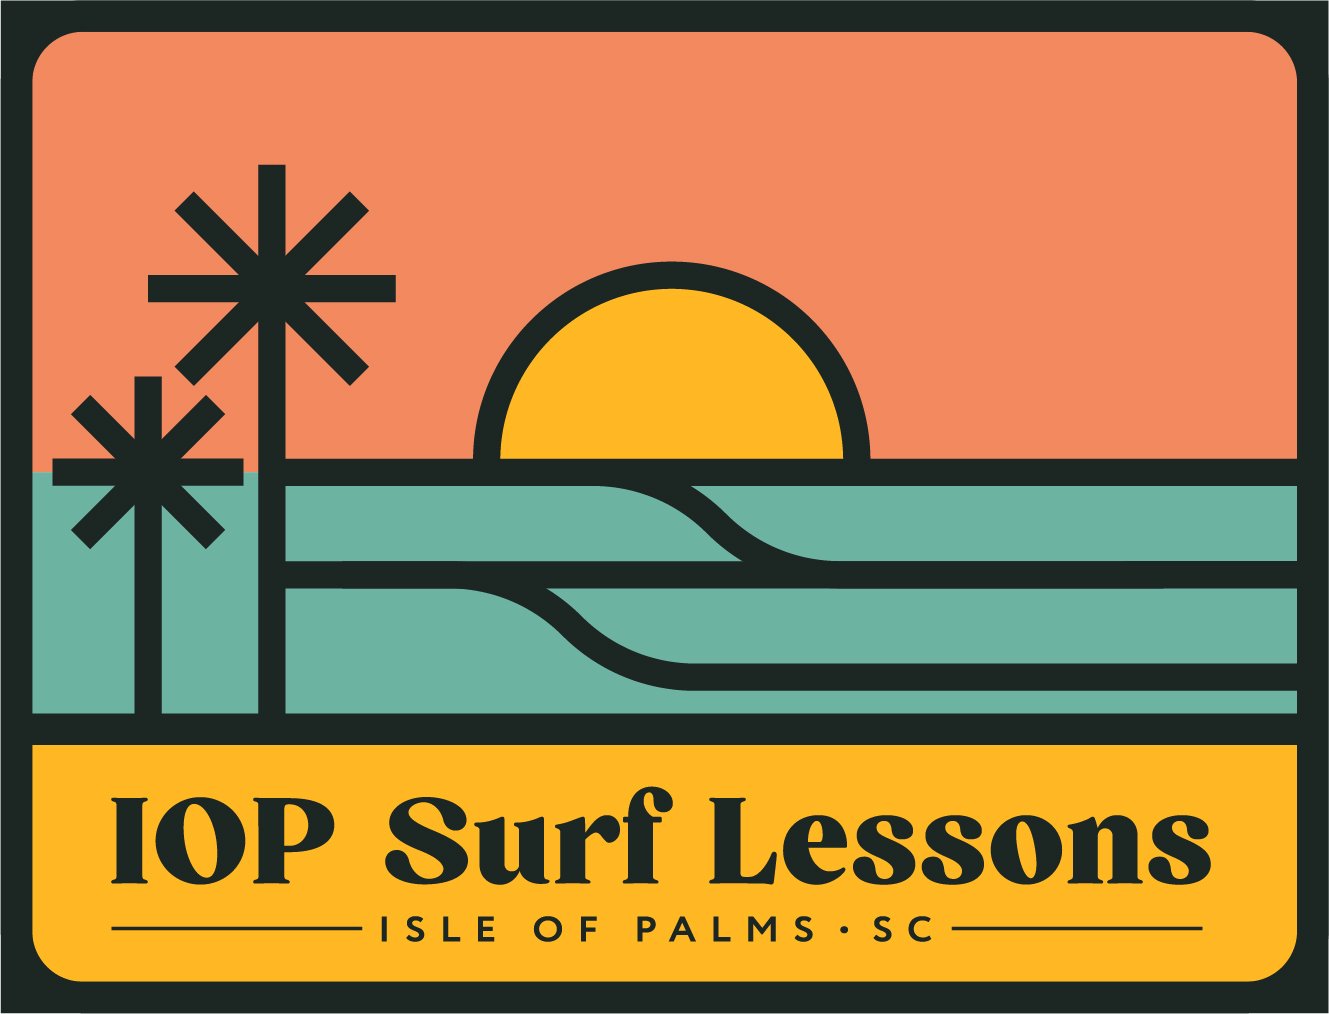 IOP Surf Lessons - Surf Lessons on Isle of Palms